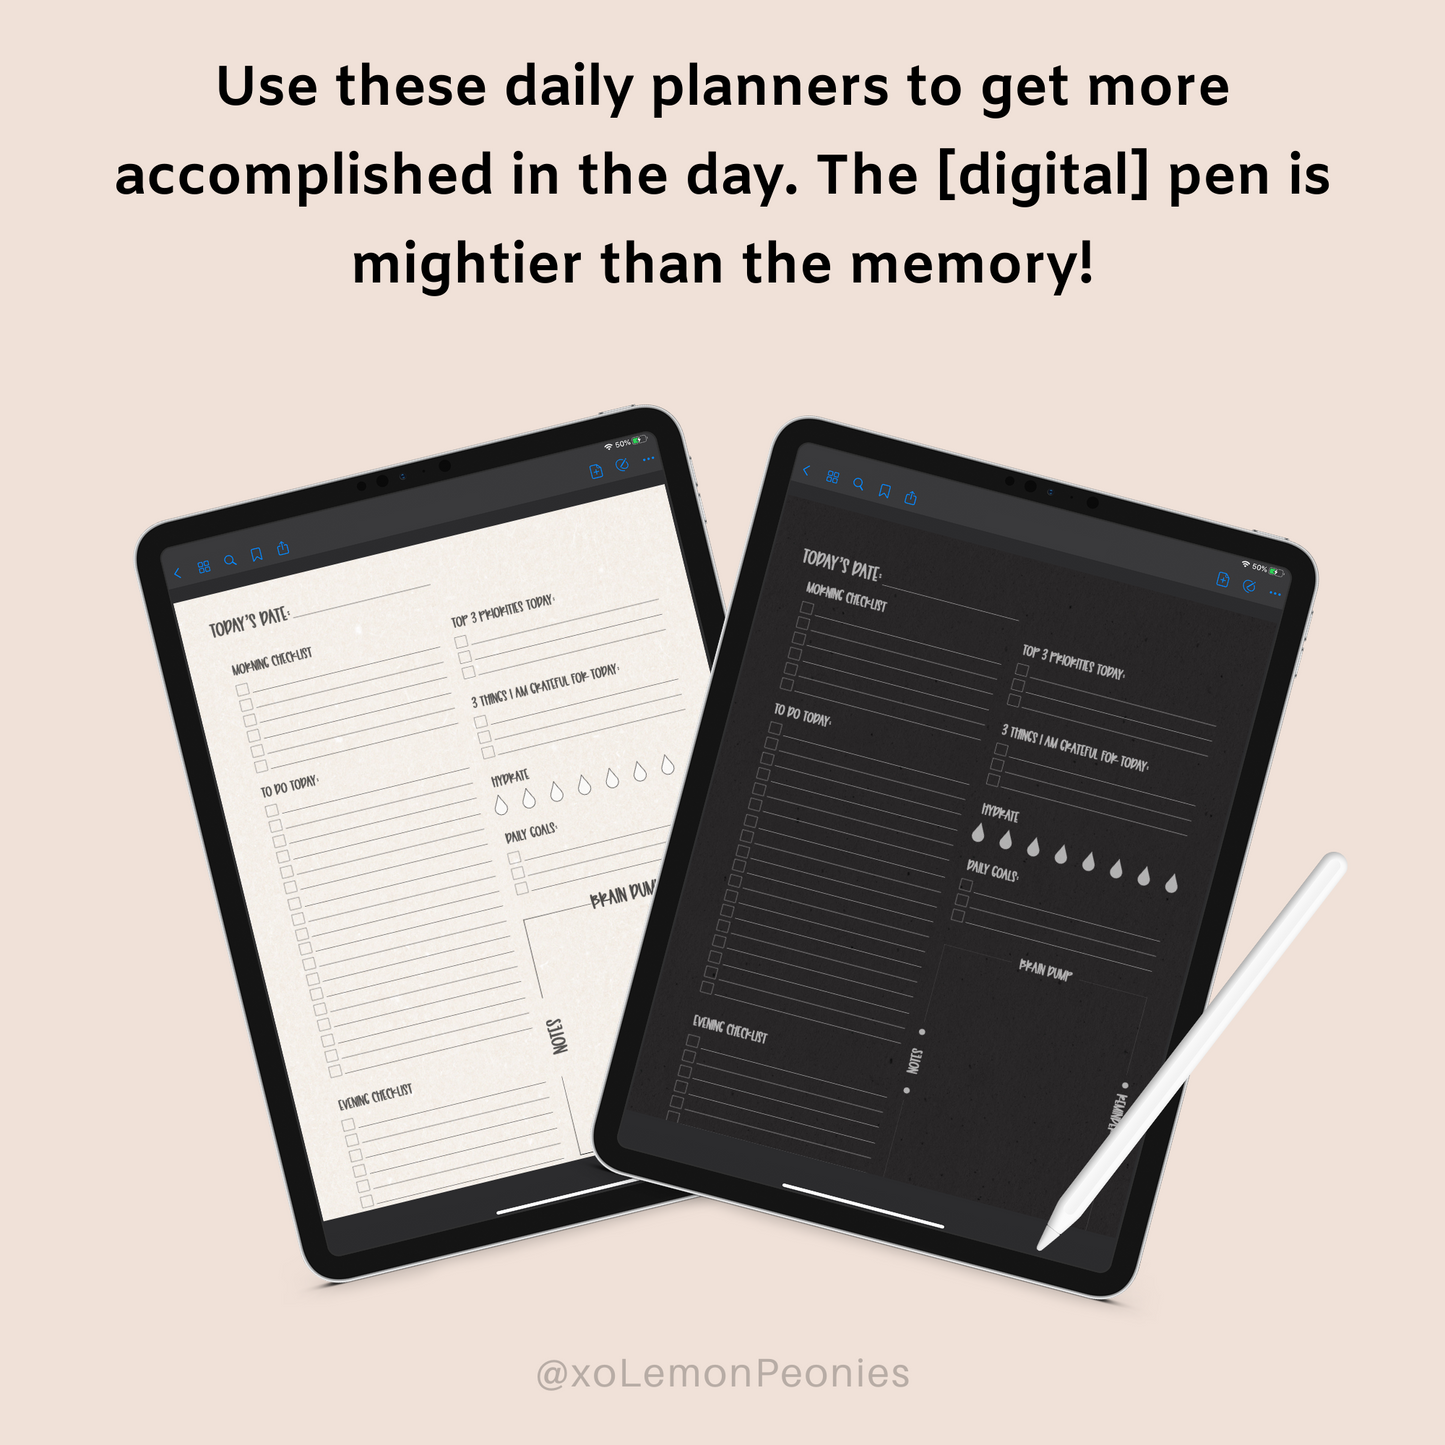 Daily Planner | Dark mode daily planner for iPad- goodnotes and noteability